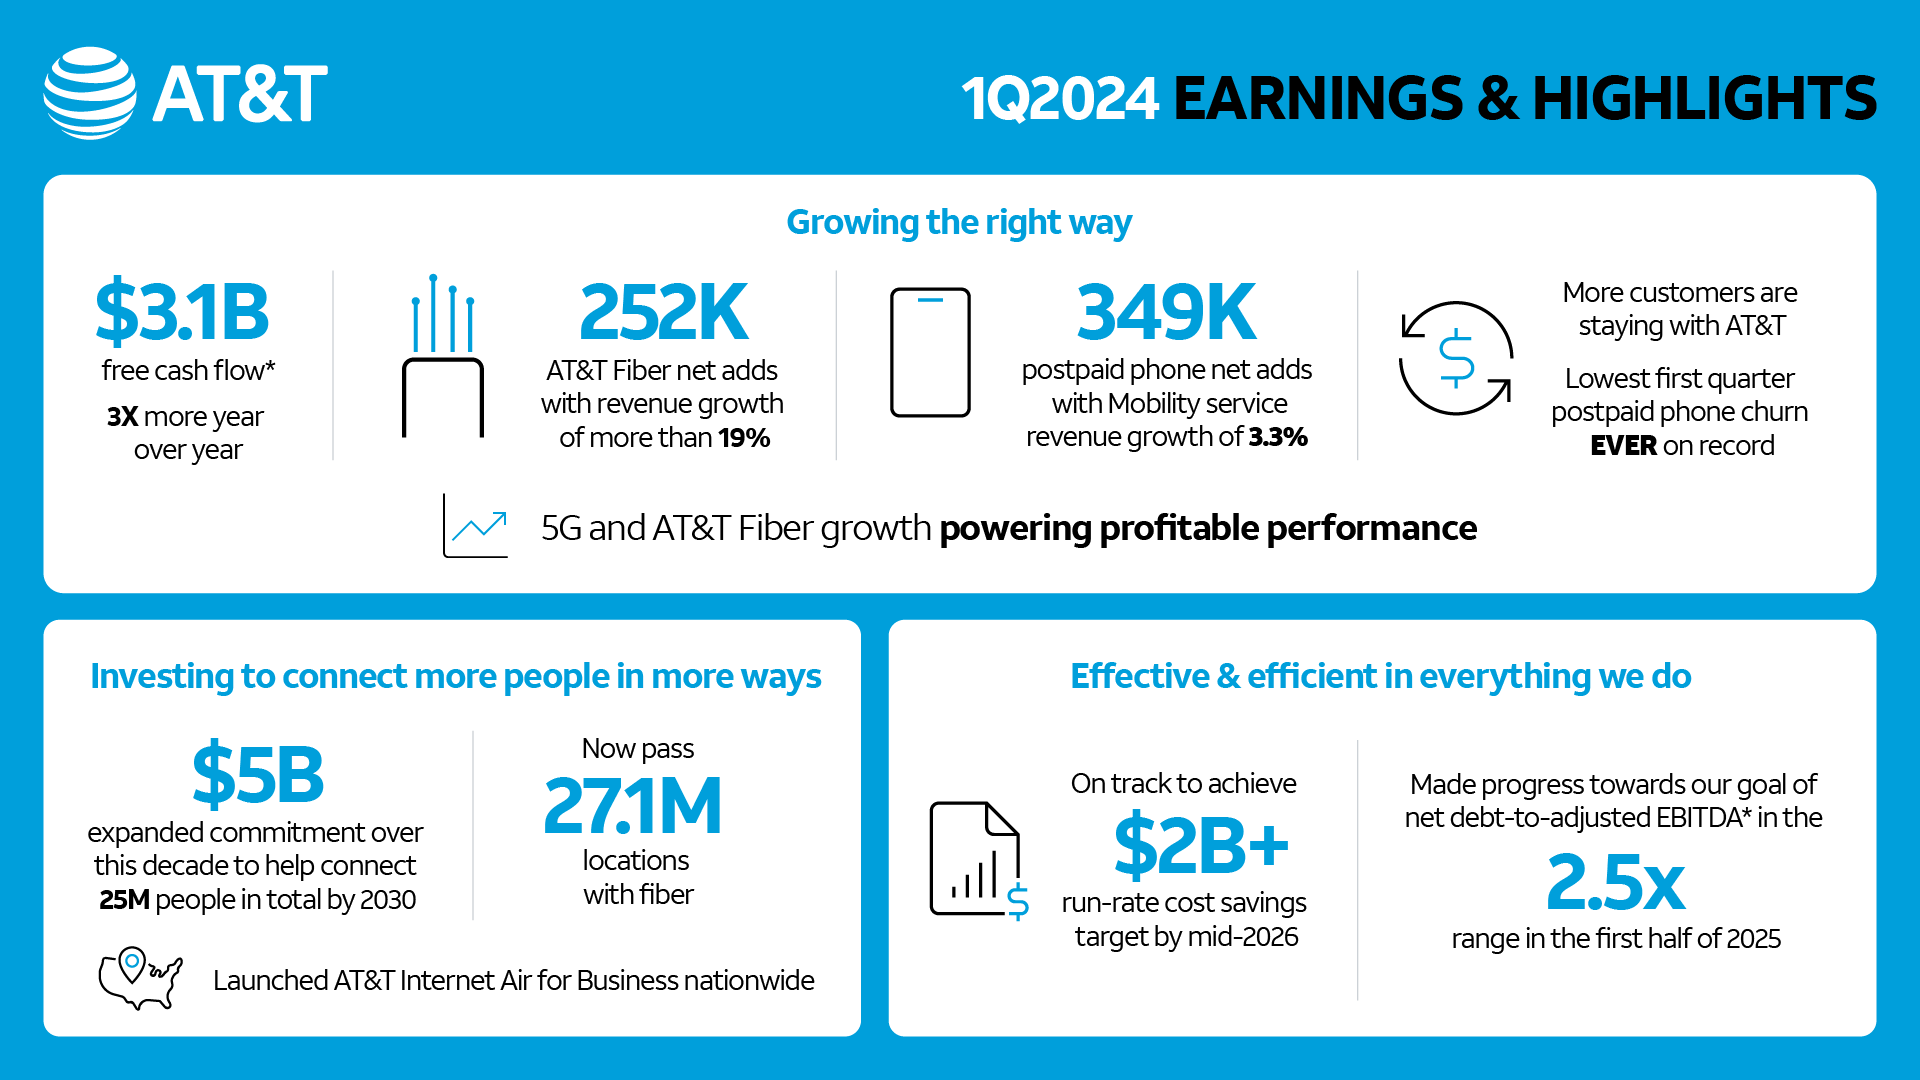 AT&T 1Q2024 Earnings and Highlights infographic